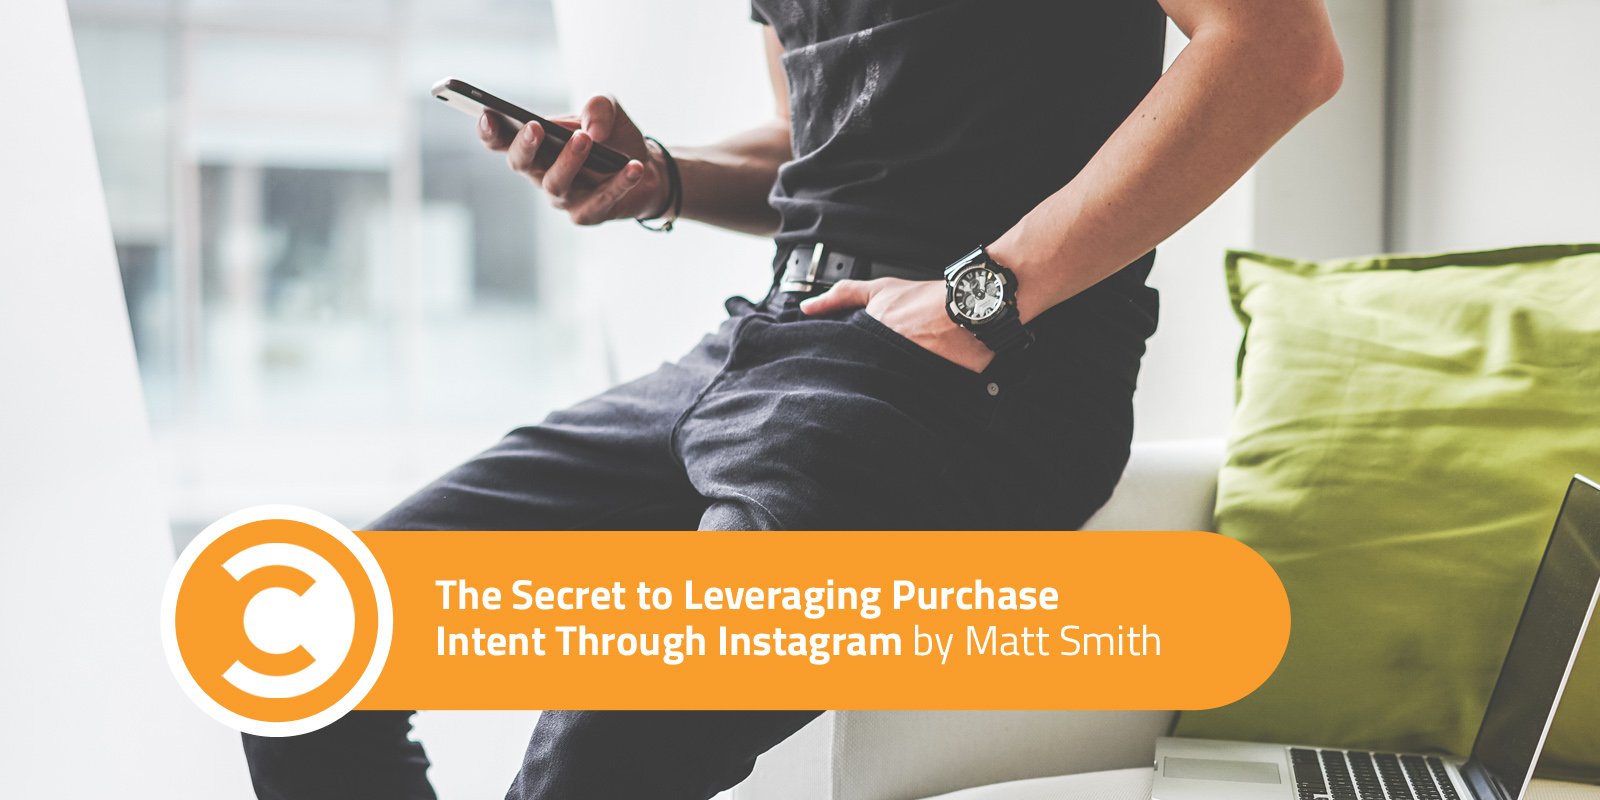 The Secret to Leveraging Purchase Intent Through Instagram